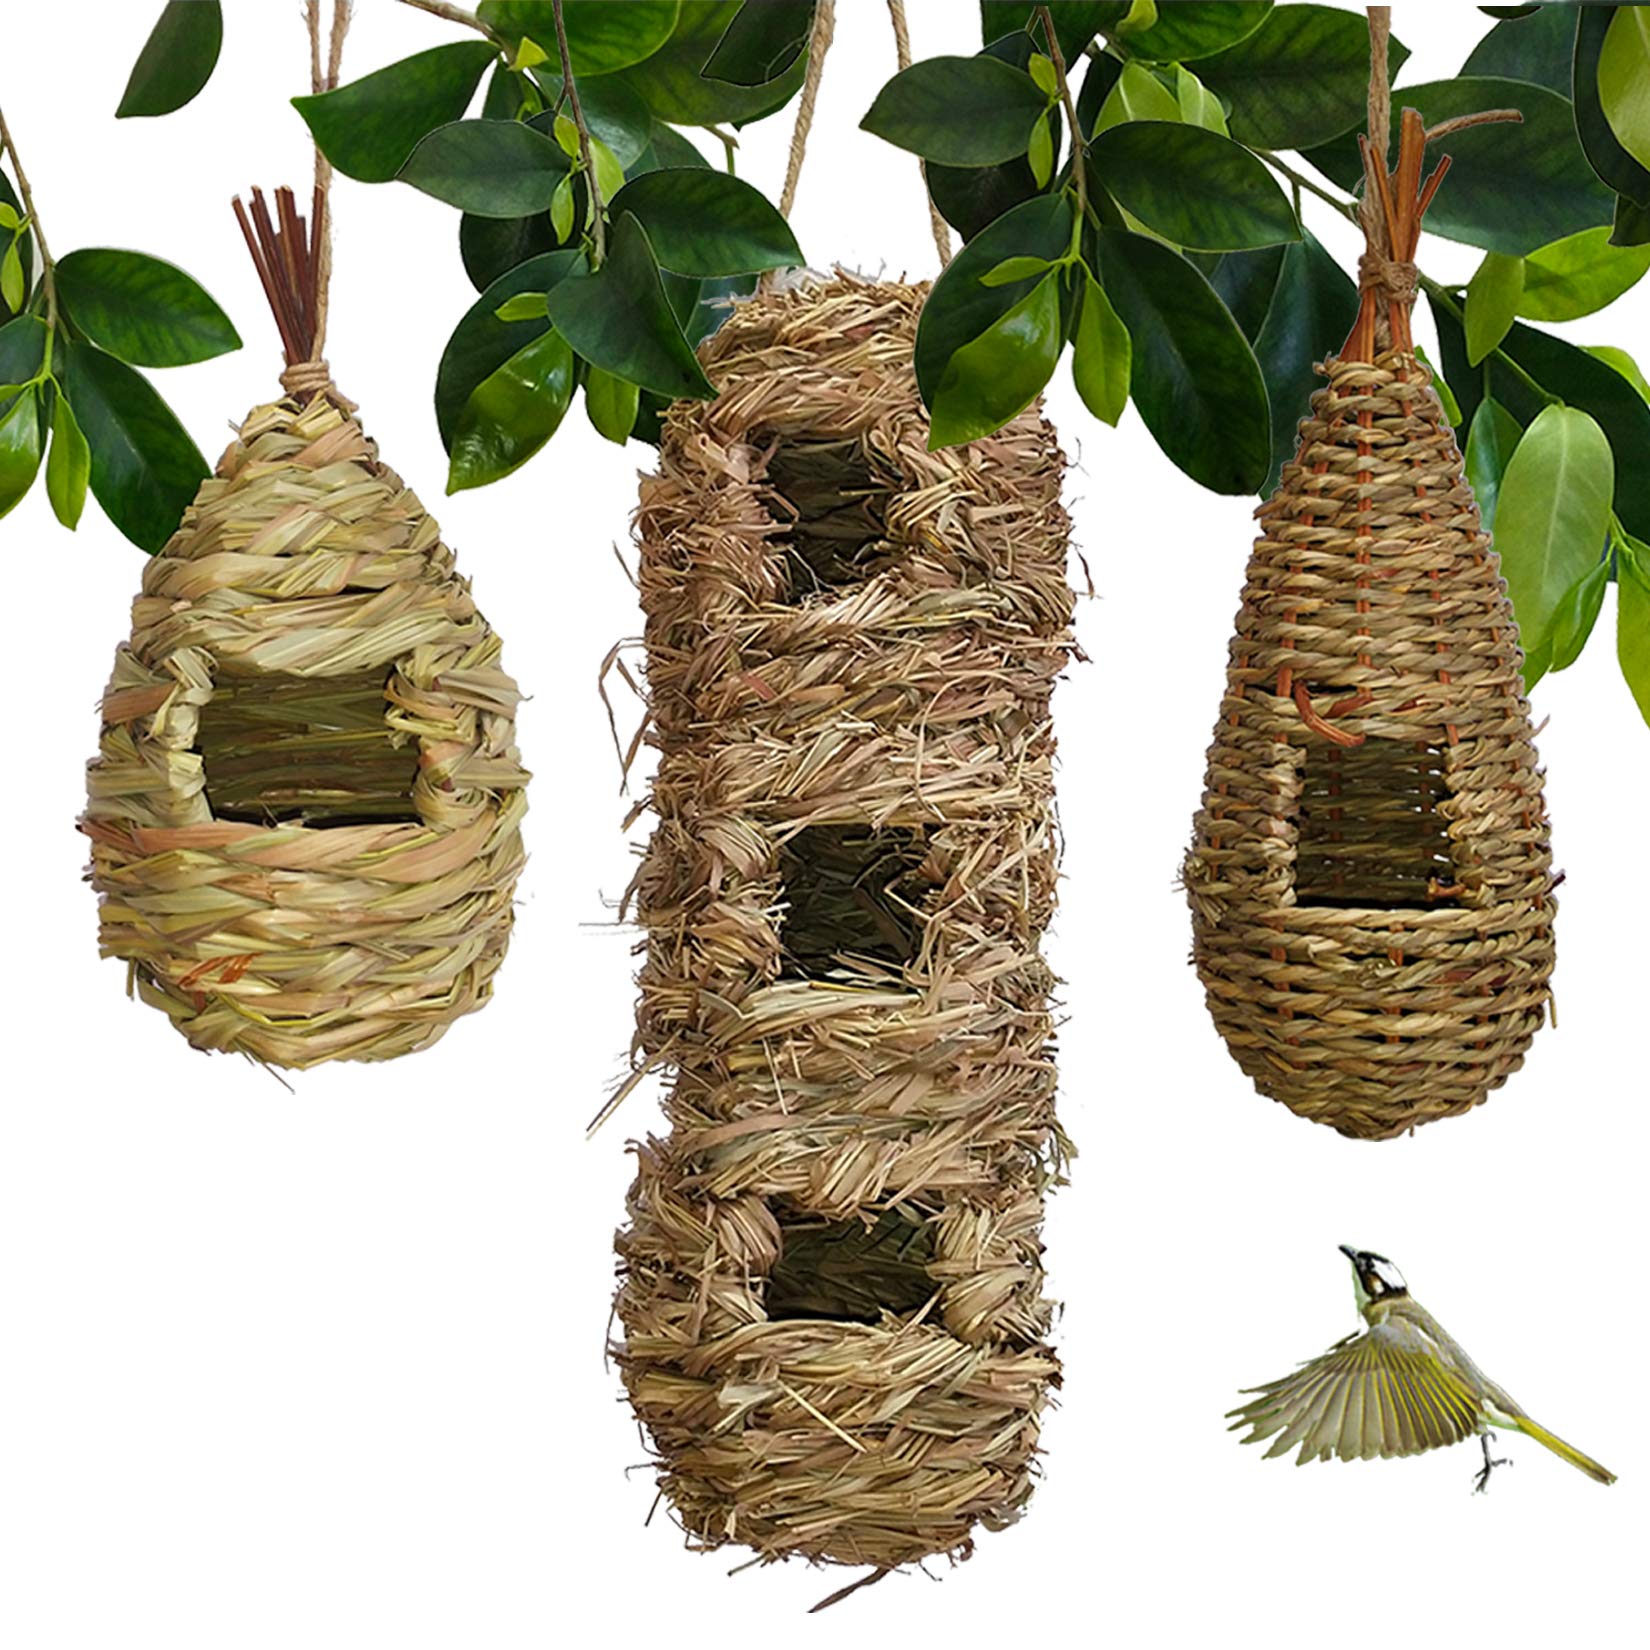 Hand-Woven Teardrop Shaped Eco-Friendly Birds Cages Nest Roosting